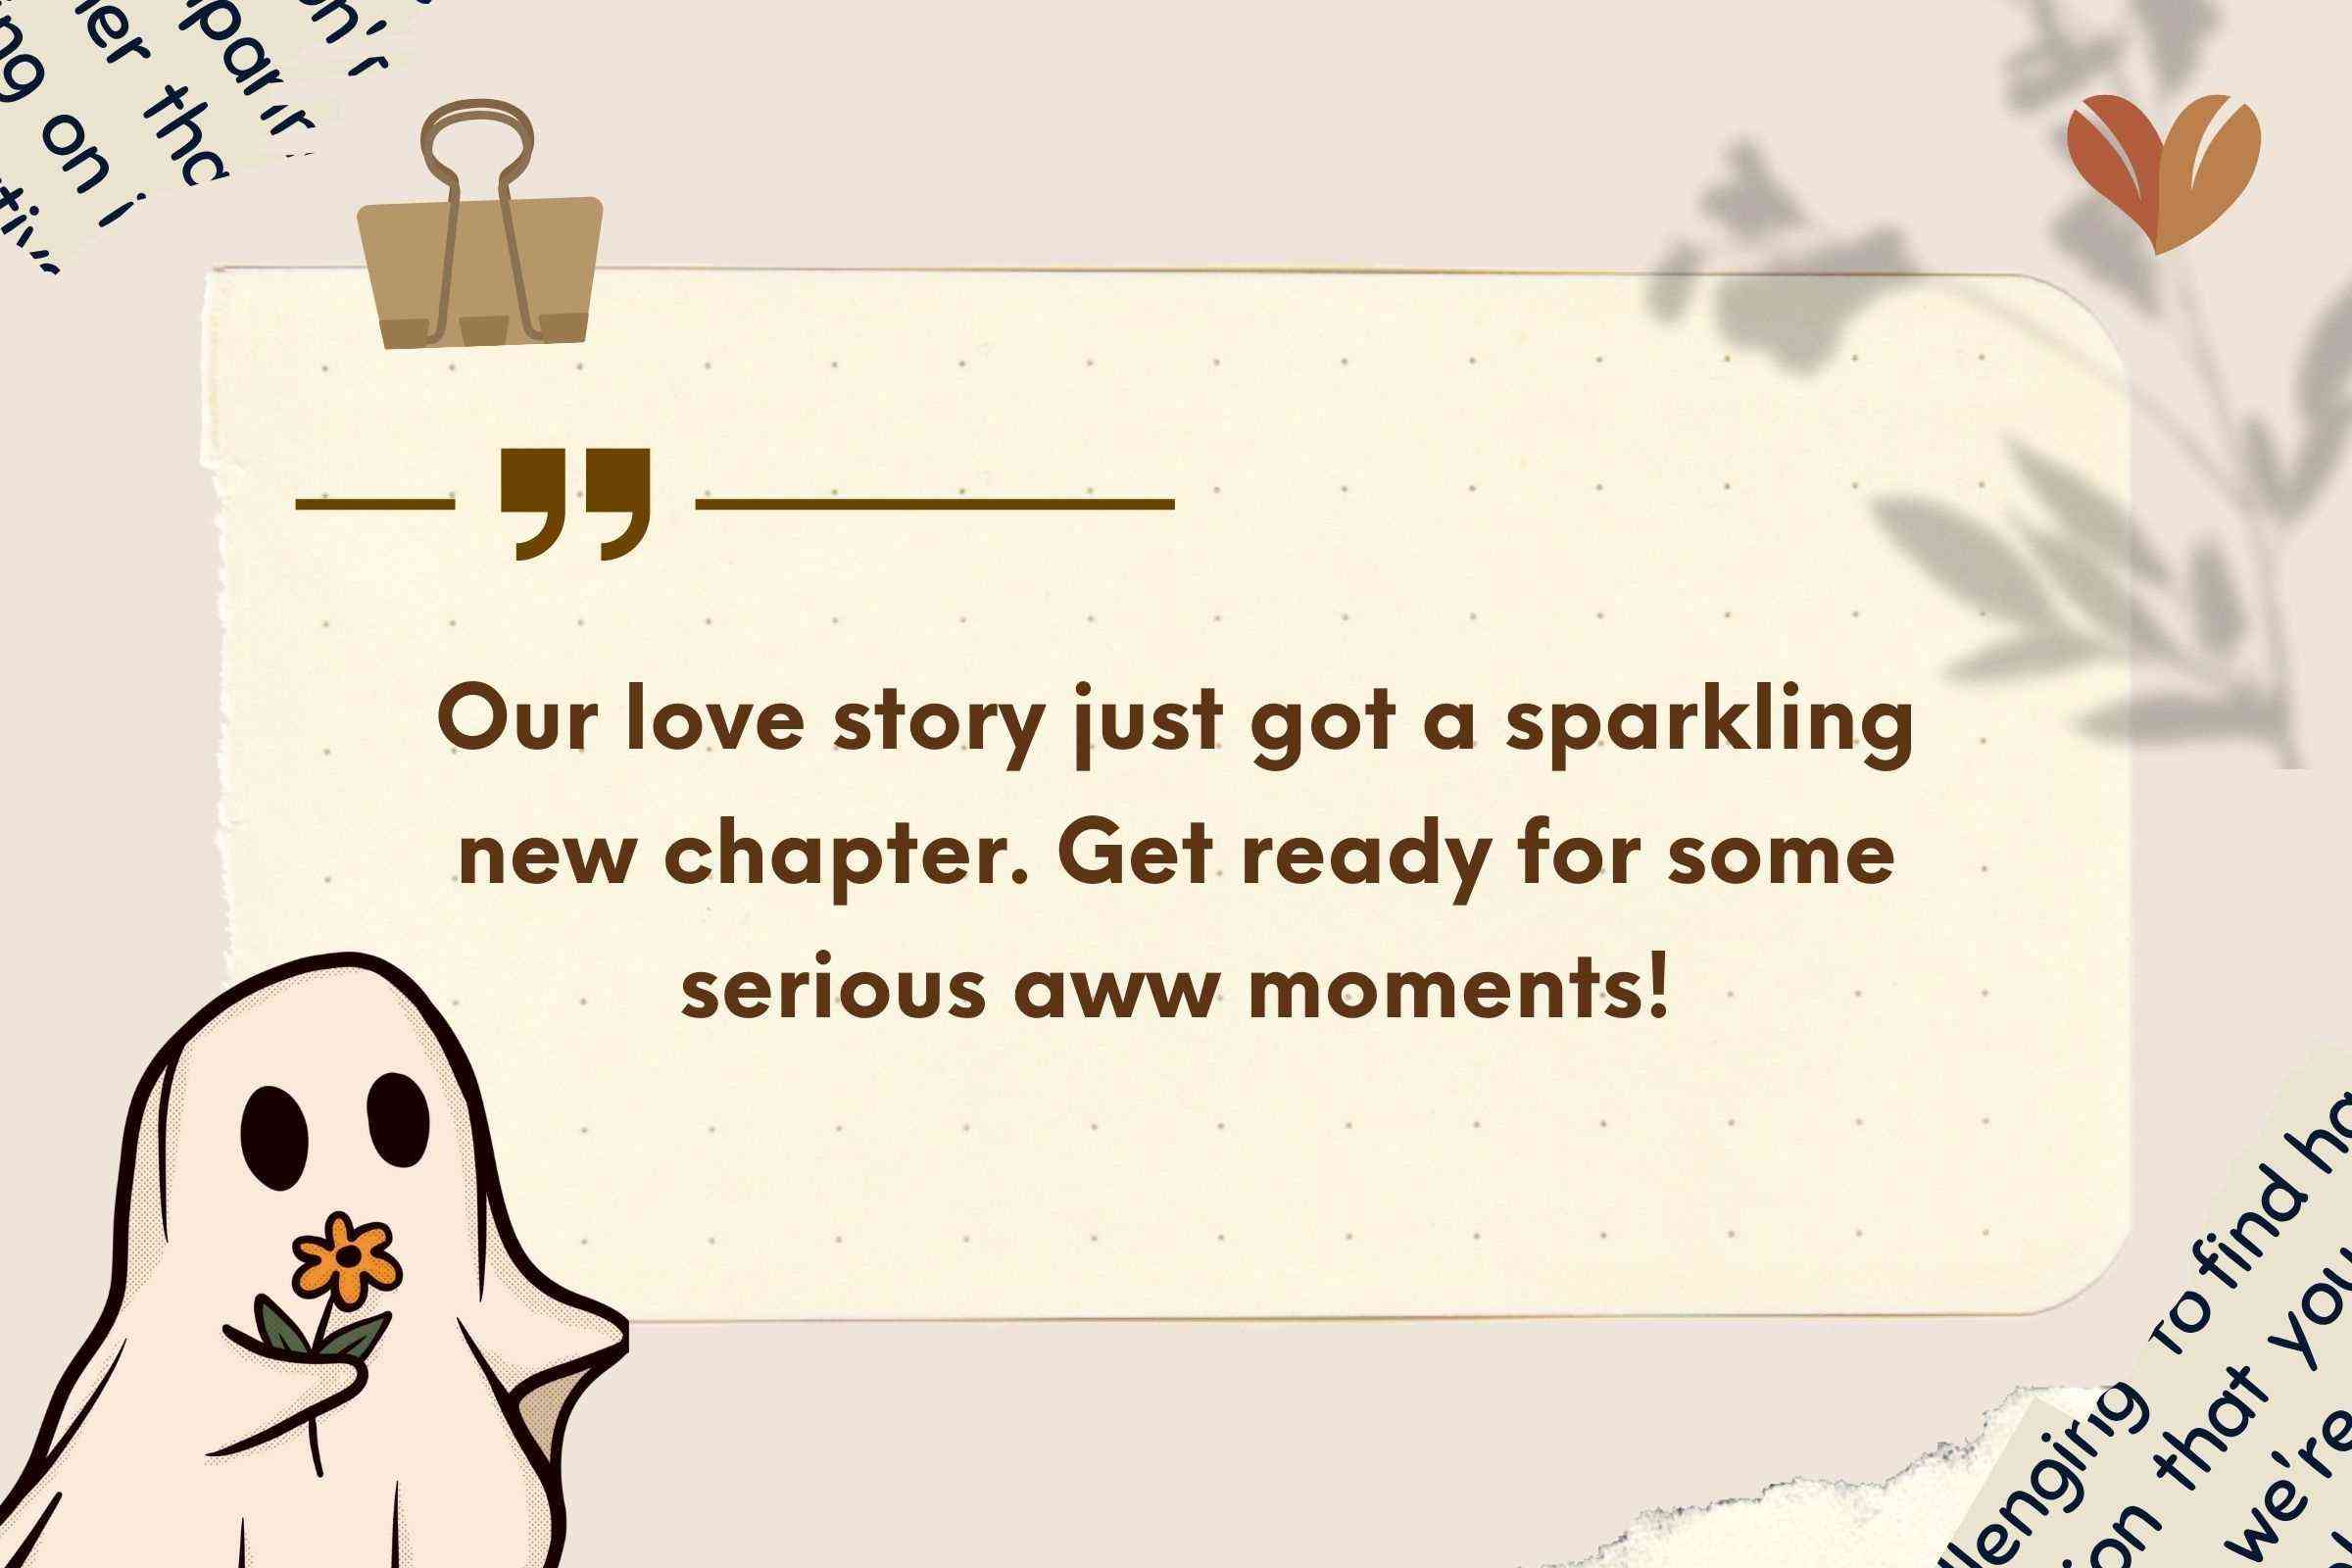 Our love story just got a sparkling new chapter. Get ready for some serious aww moments!